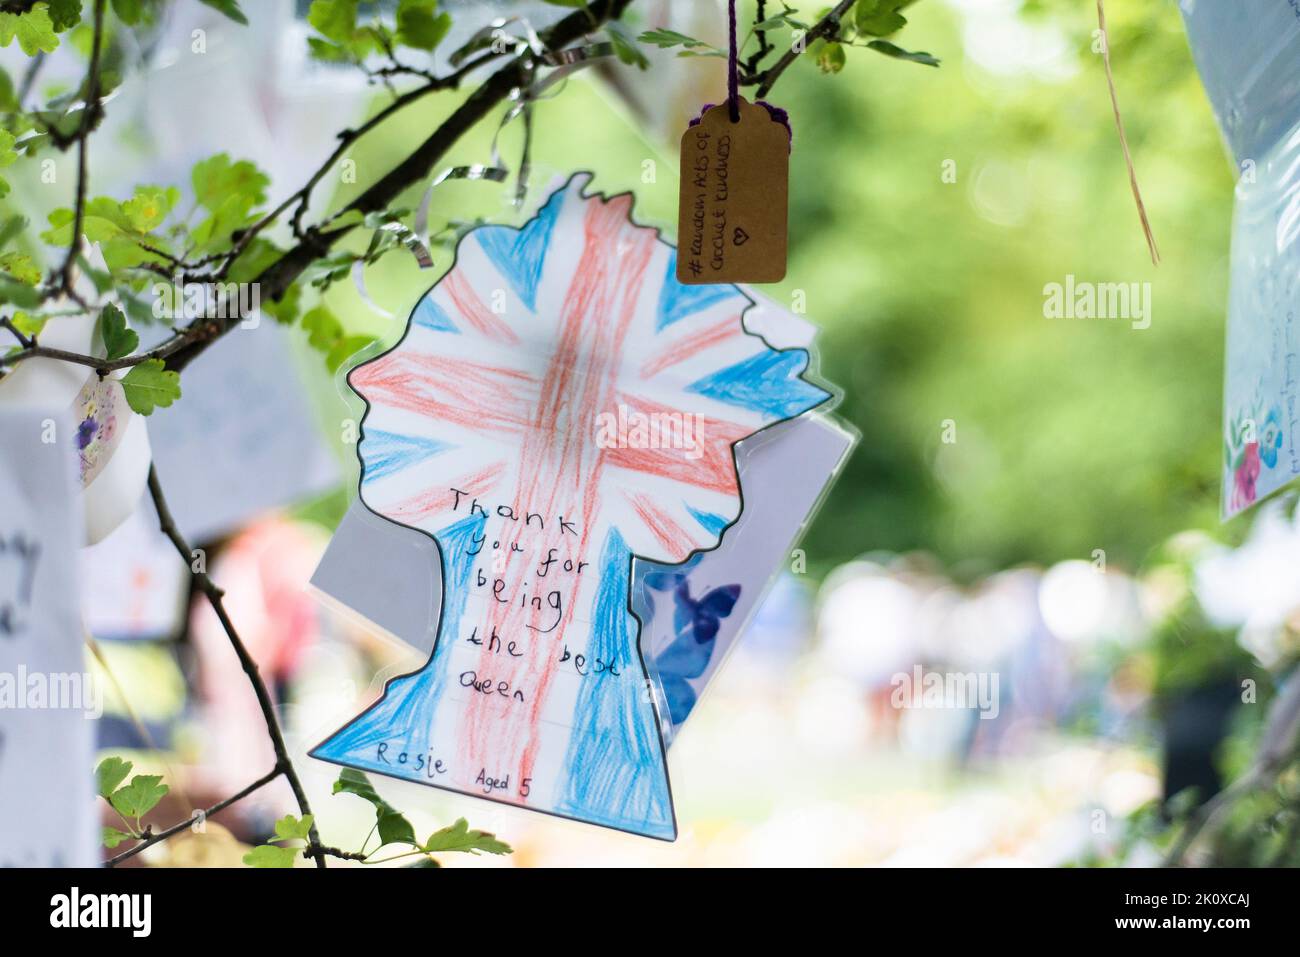 Floral Tributes to Queen Elizabeth II. London, September 2022 Stock Photo